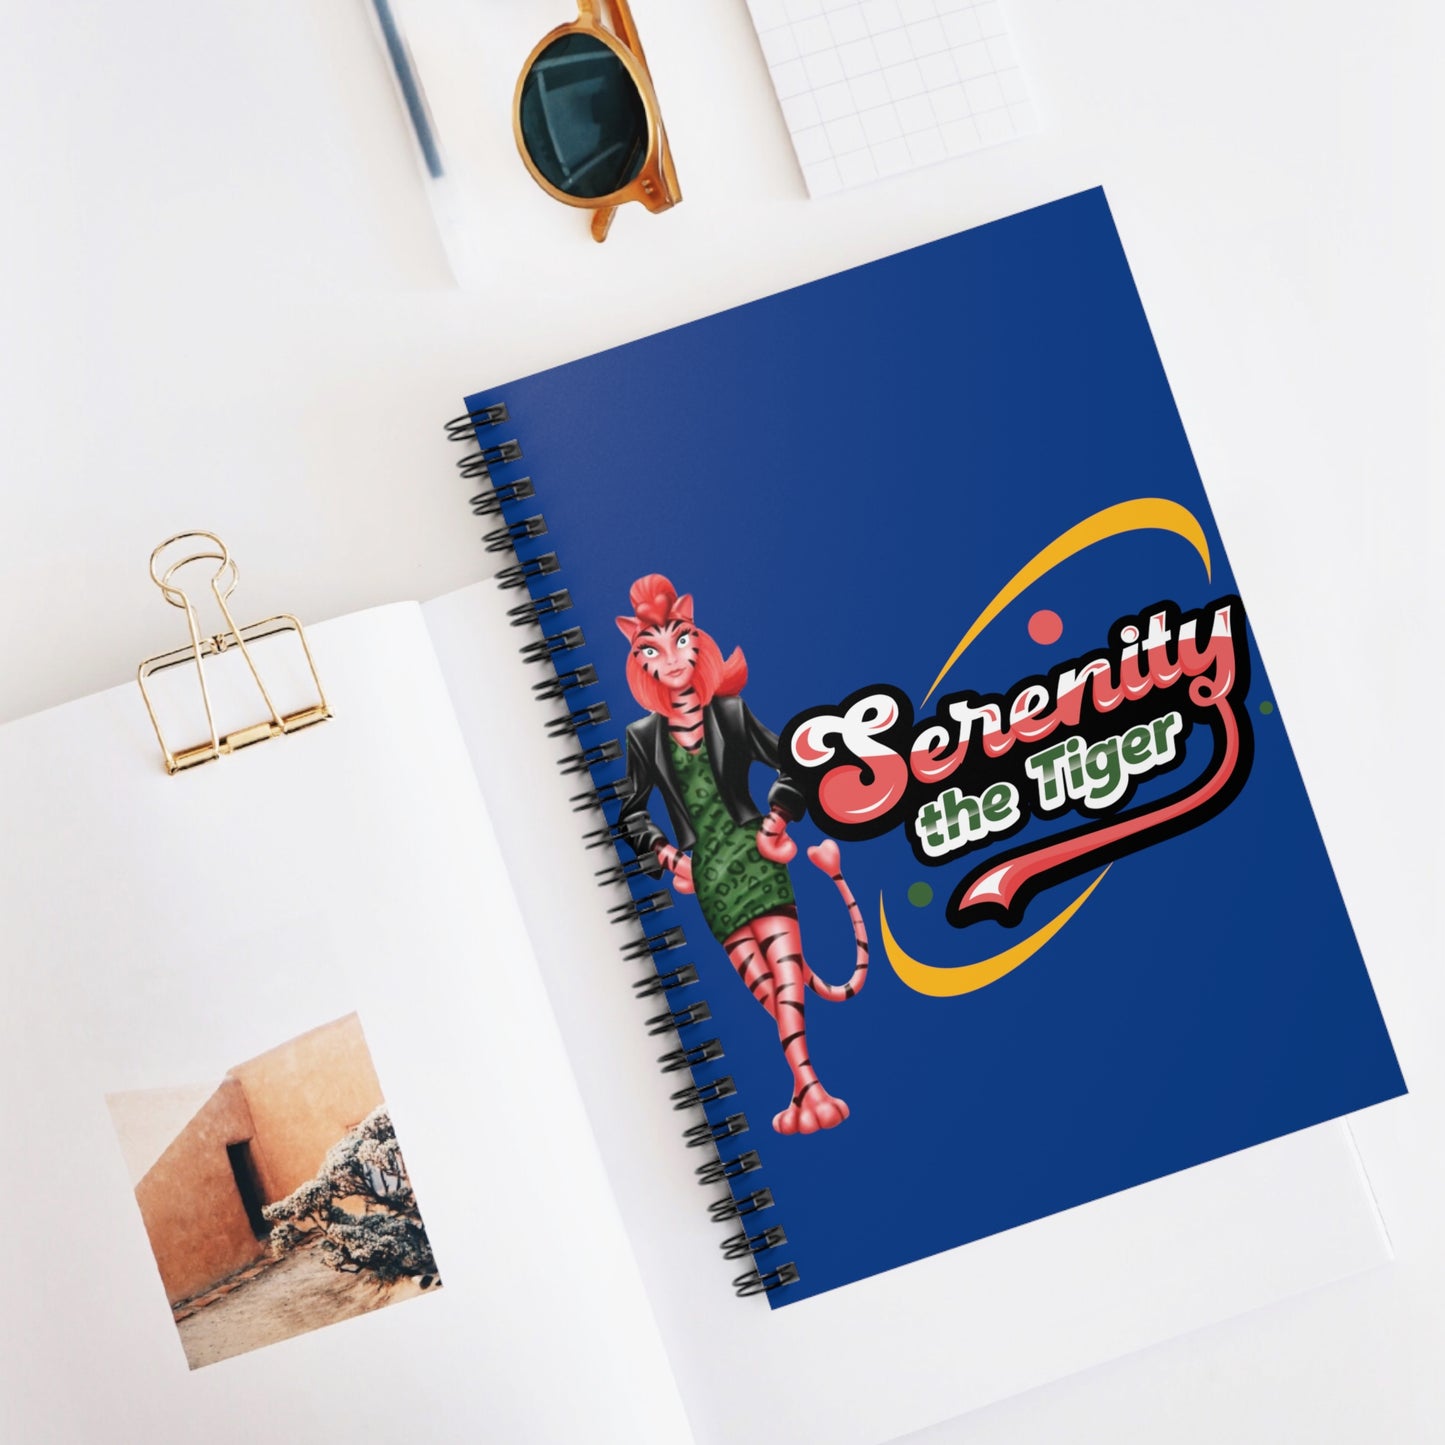 Serenity Spiral Notebook - Ruled Line